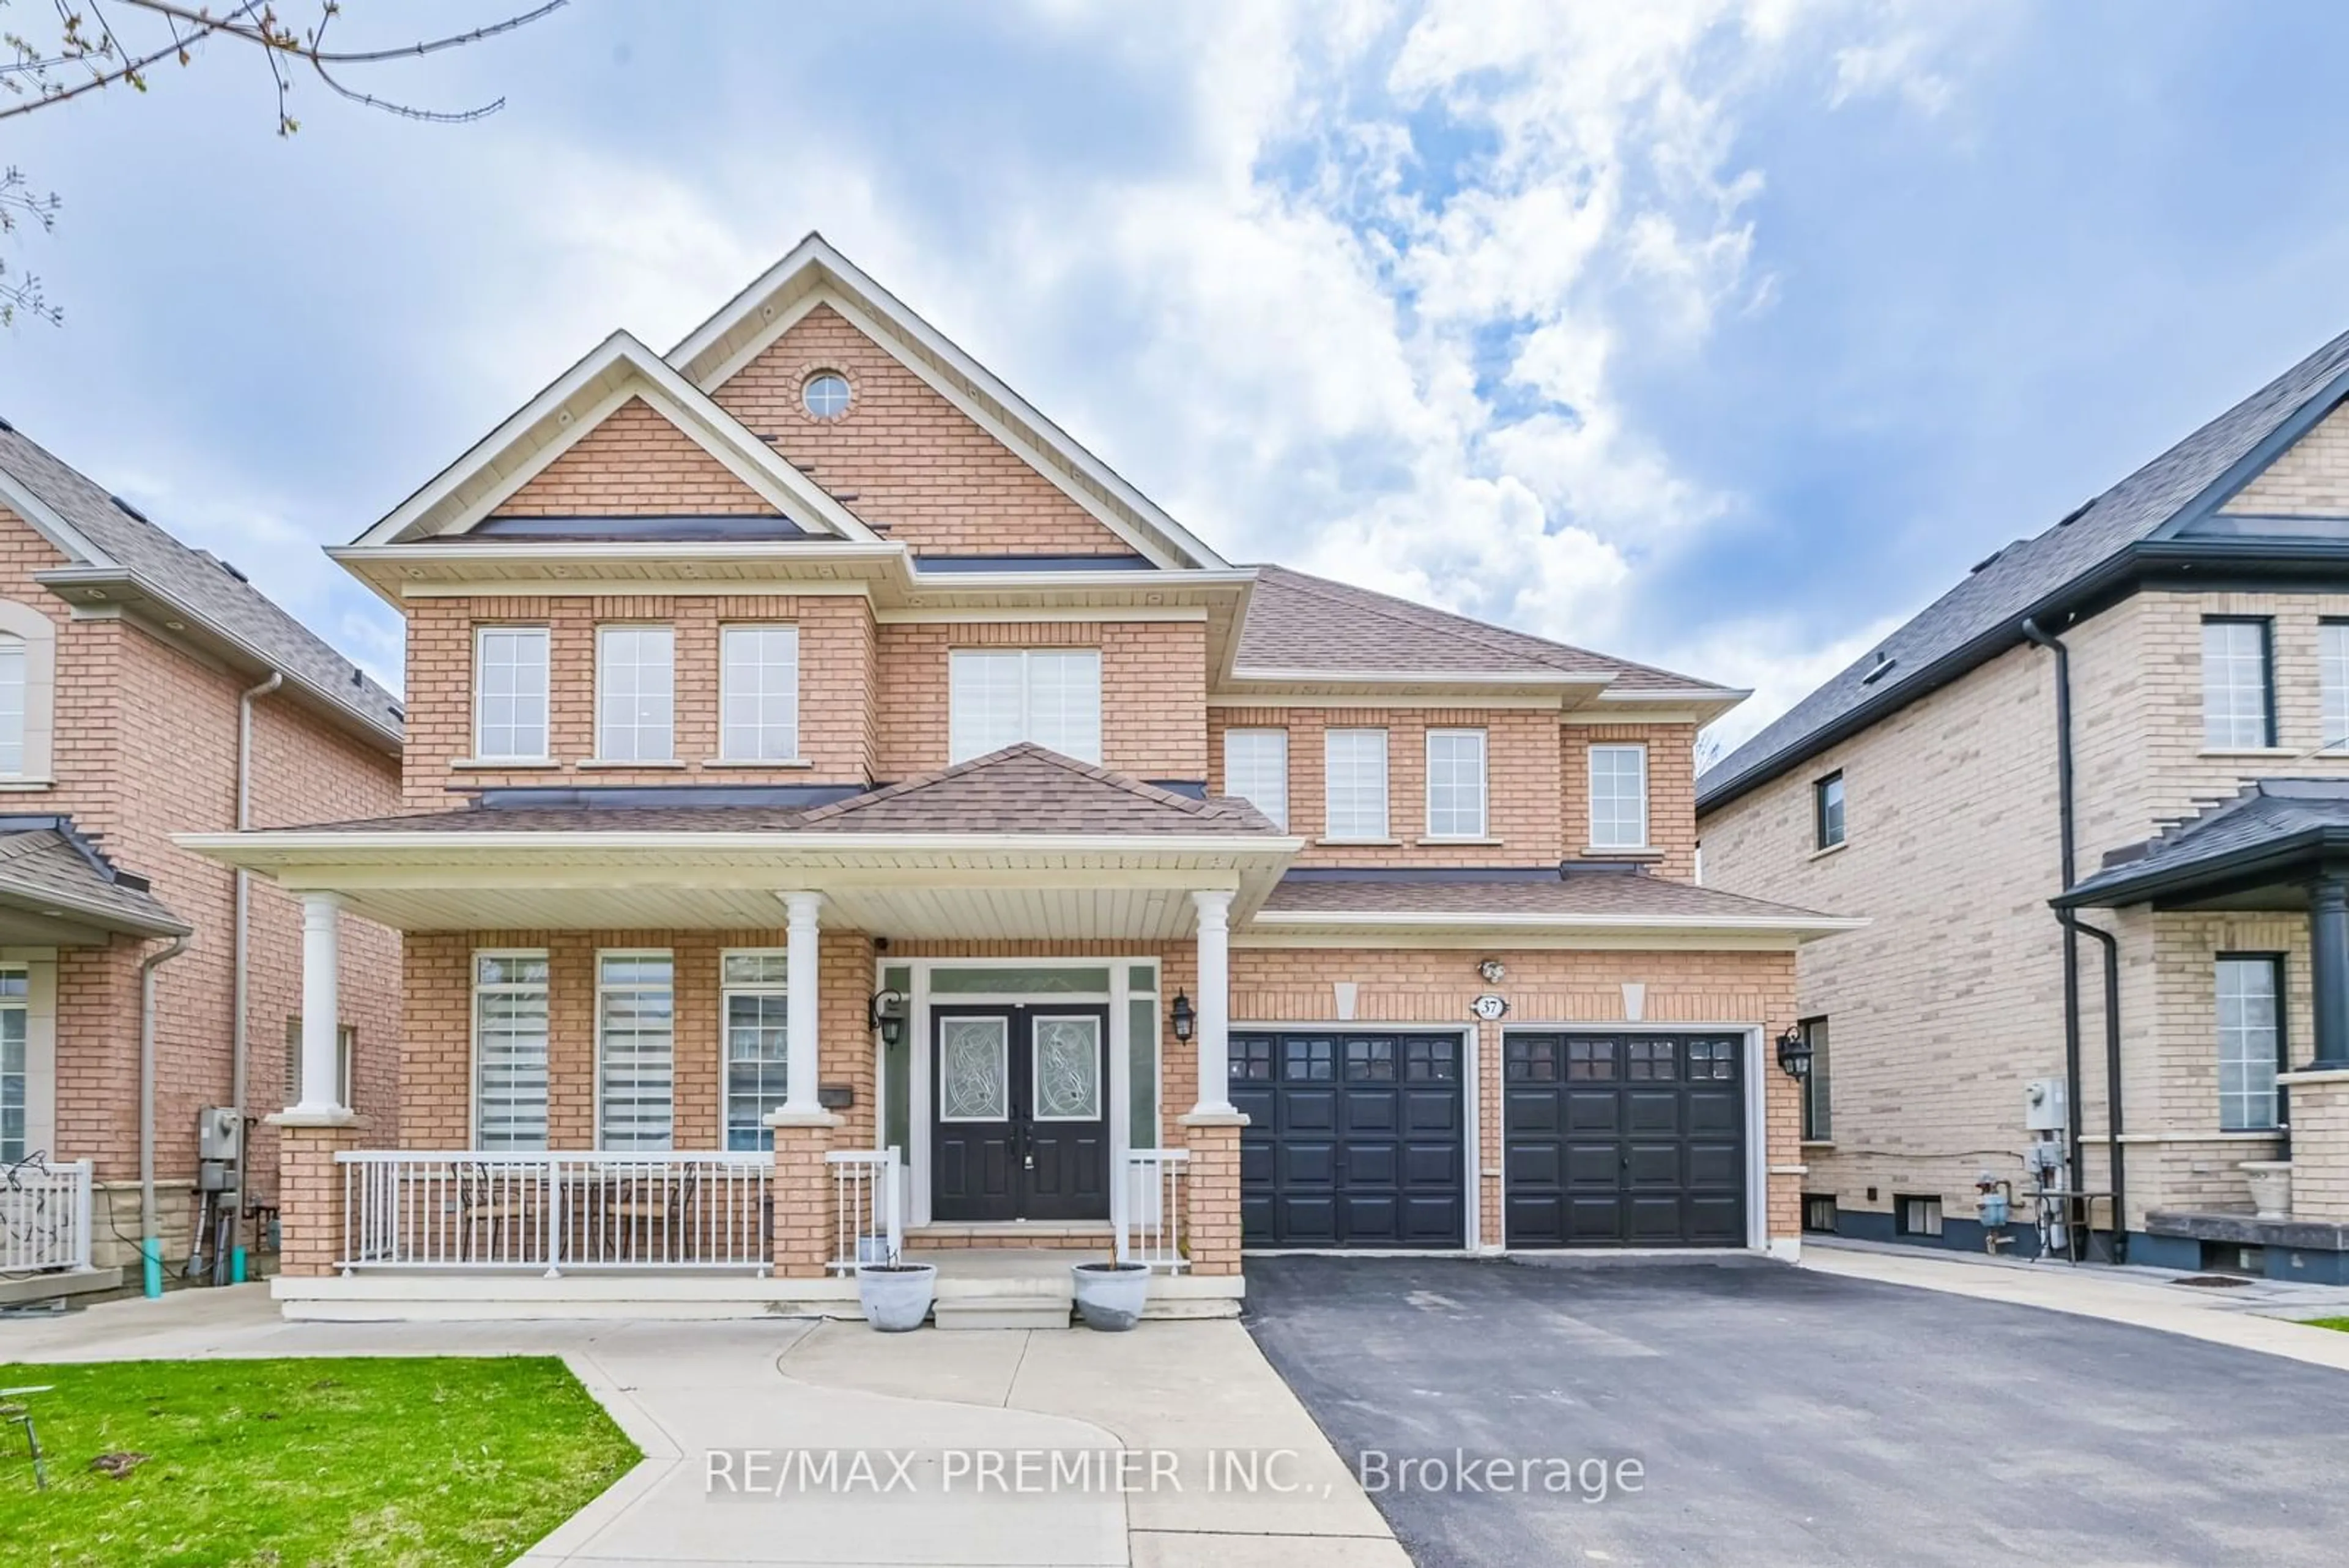 Home with brick exterior material for 37 Colombo Cres, Vaughan Ontario L6A 0A3